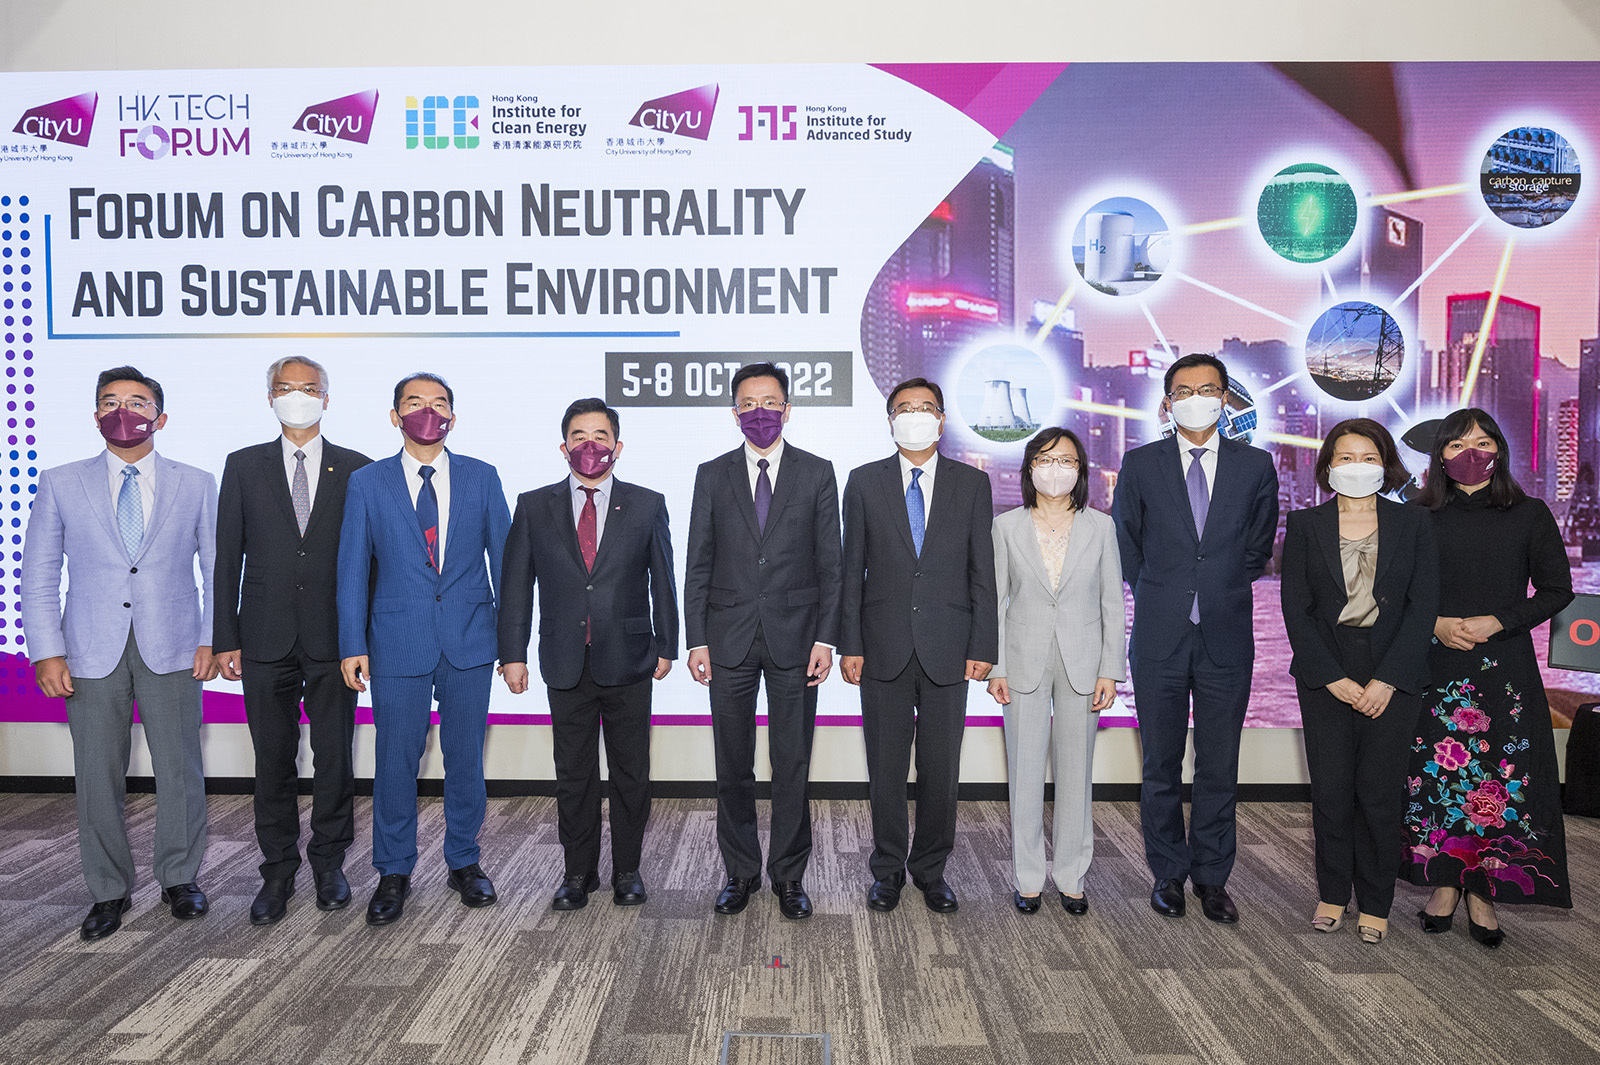 The fourth HK Tech Forum focused on carbon neutrality and sustainable environment.